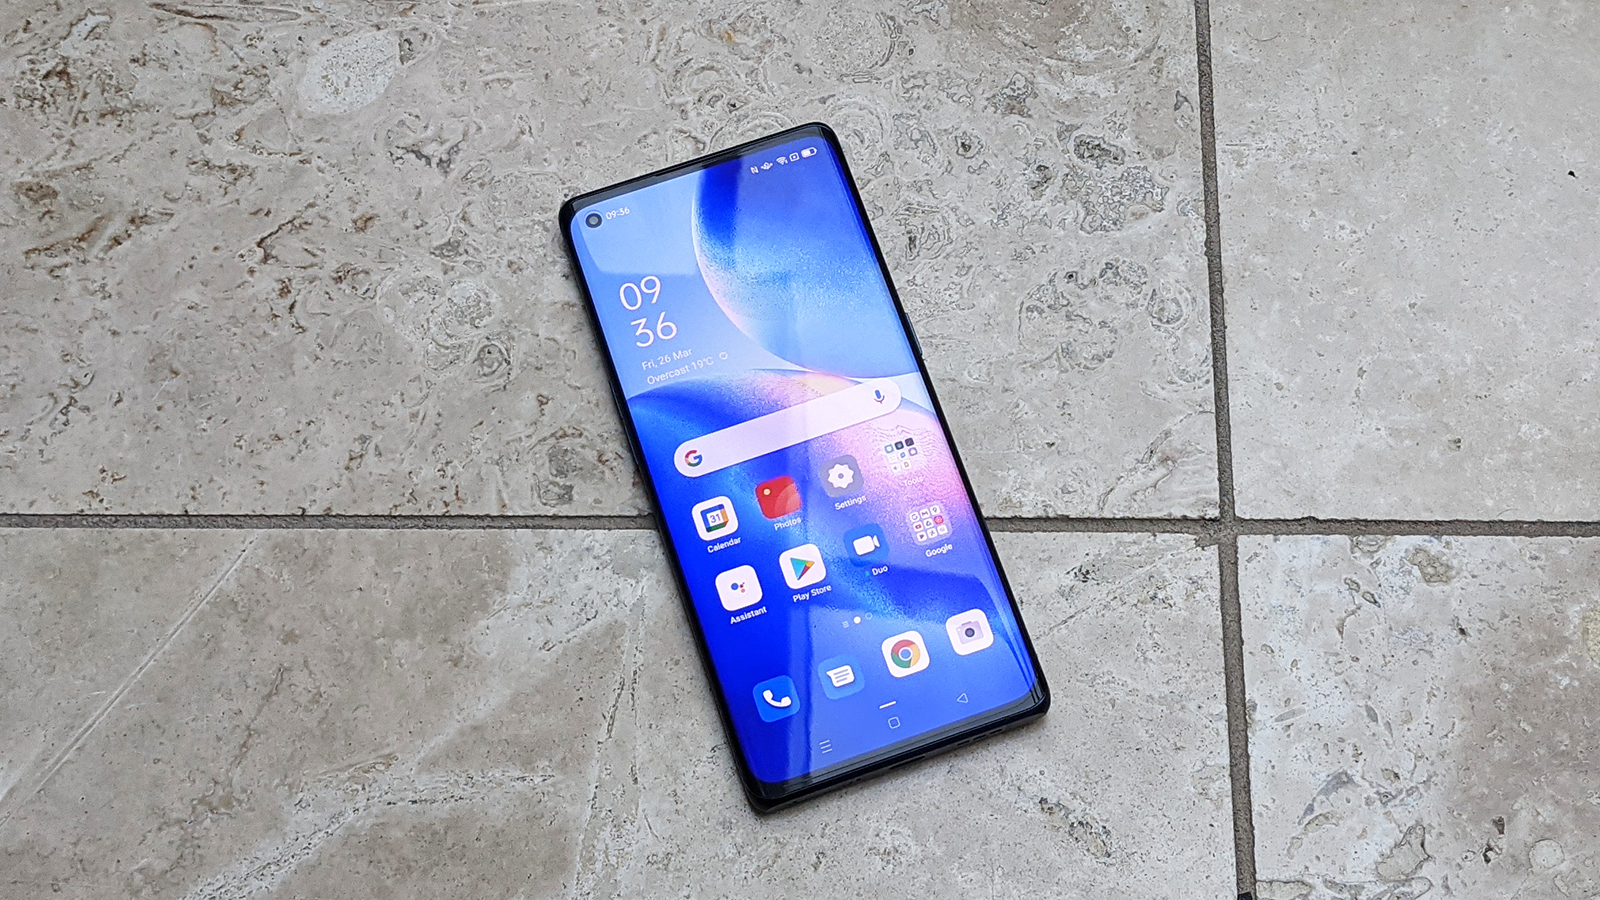 Oppo Find X3 Pro Review: Beautifully Consistent Cameras